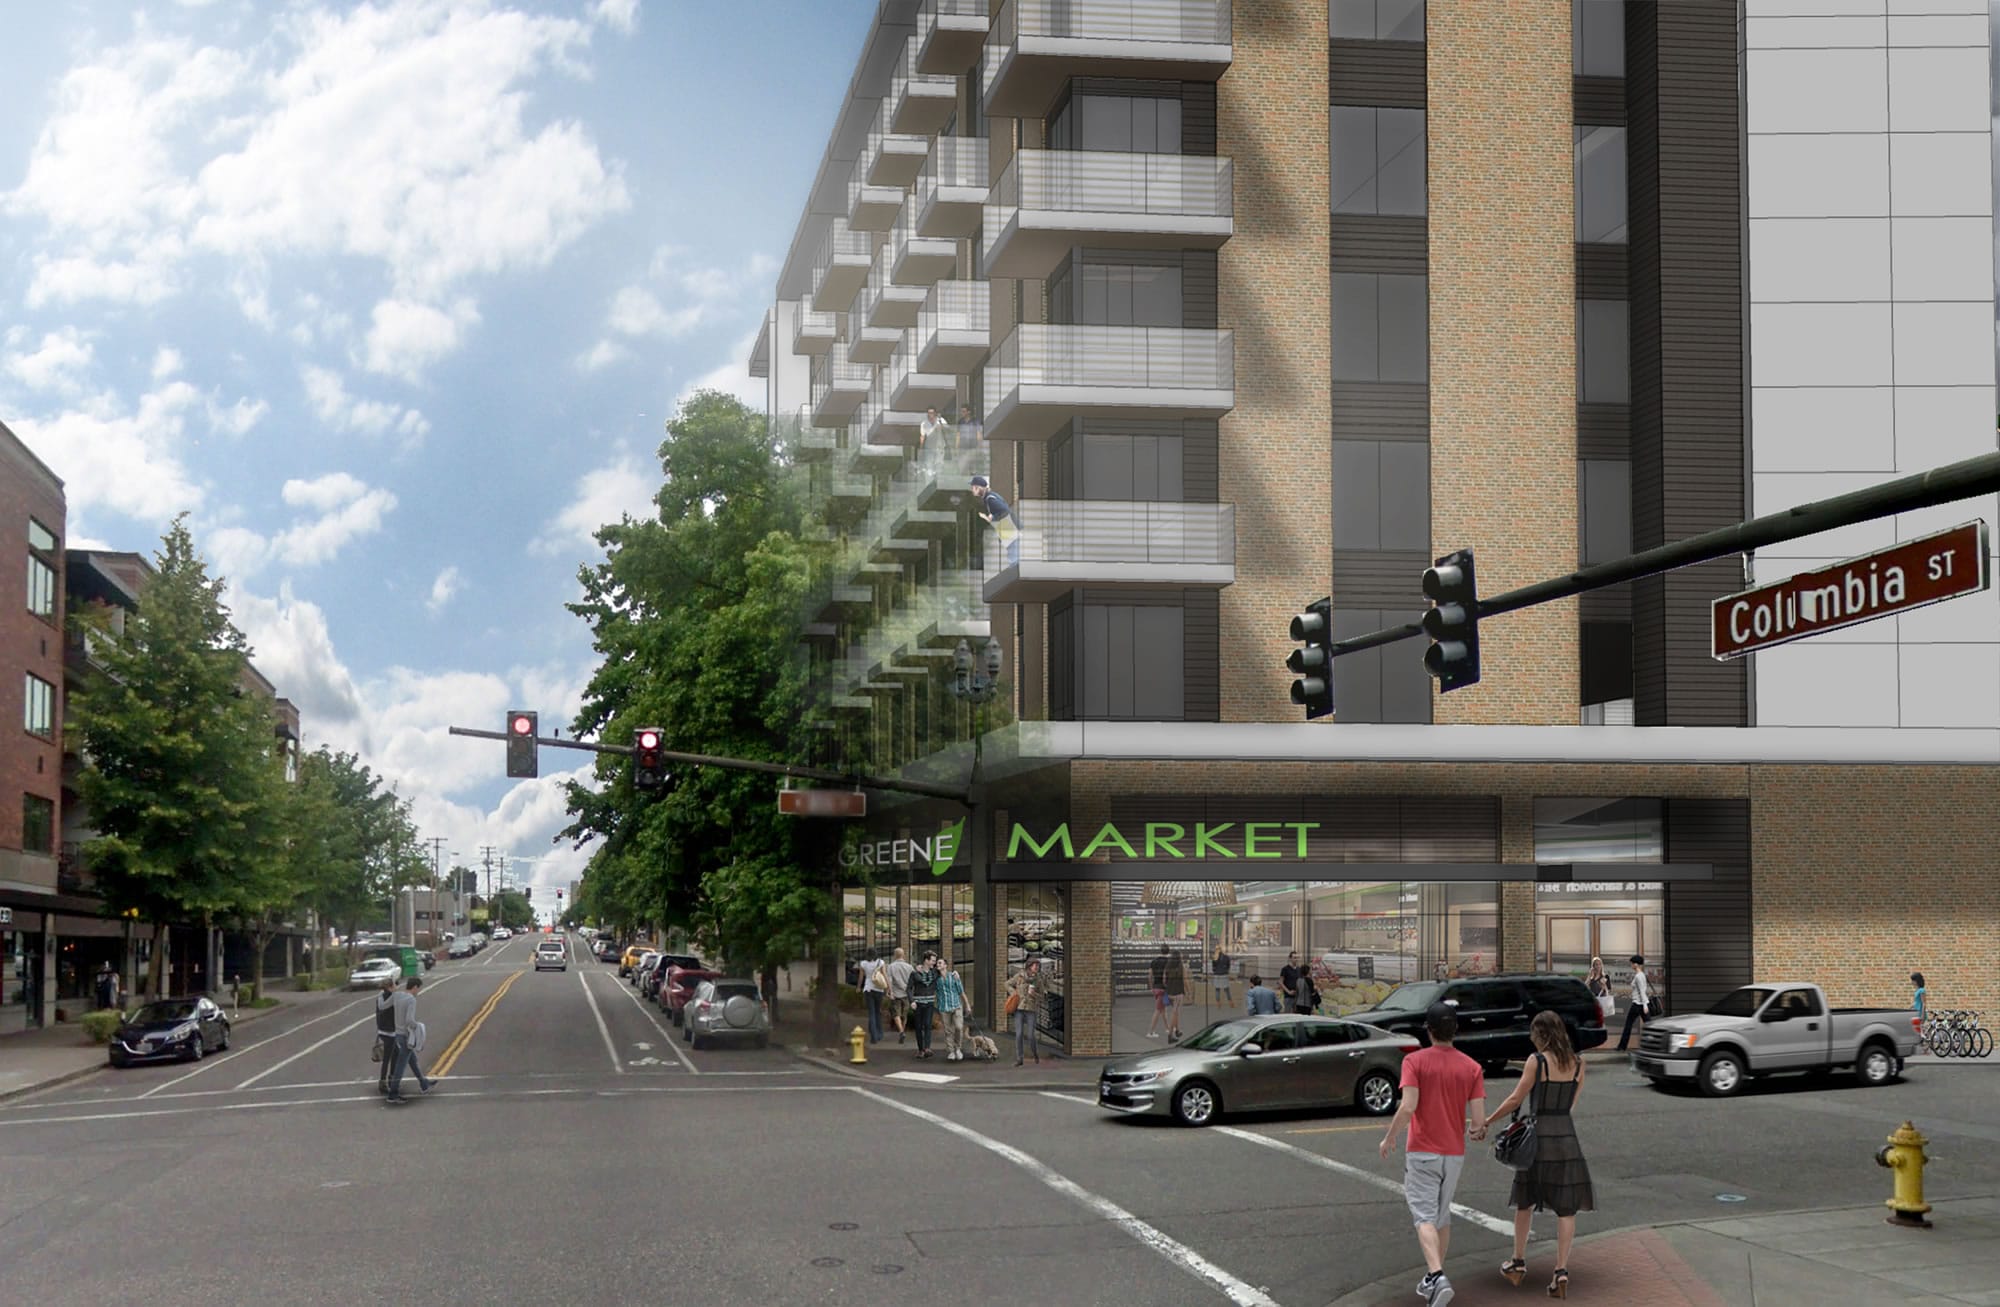 Gramor’s proposal for Block 10 in Vancouver would include a 250-unit apartment building with ground-floor retail — including a grocery store — as well as underground and above-ground parking.